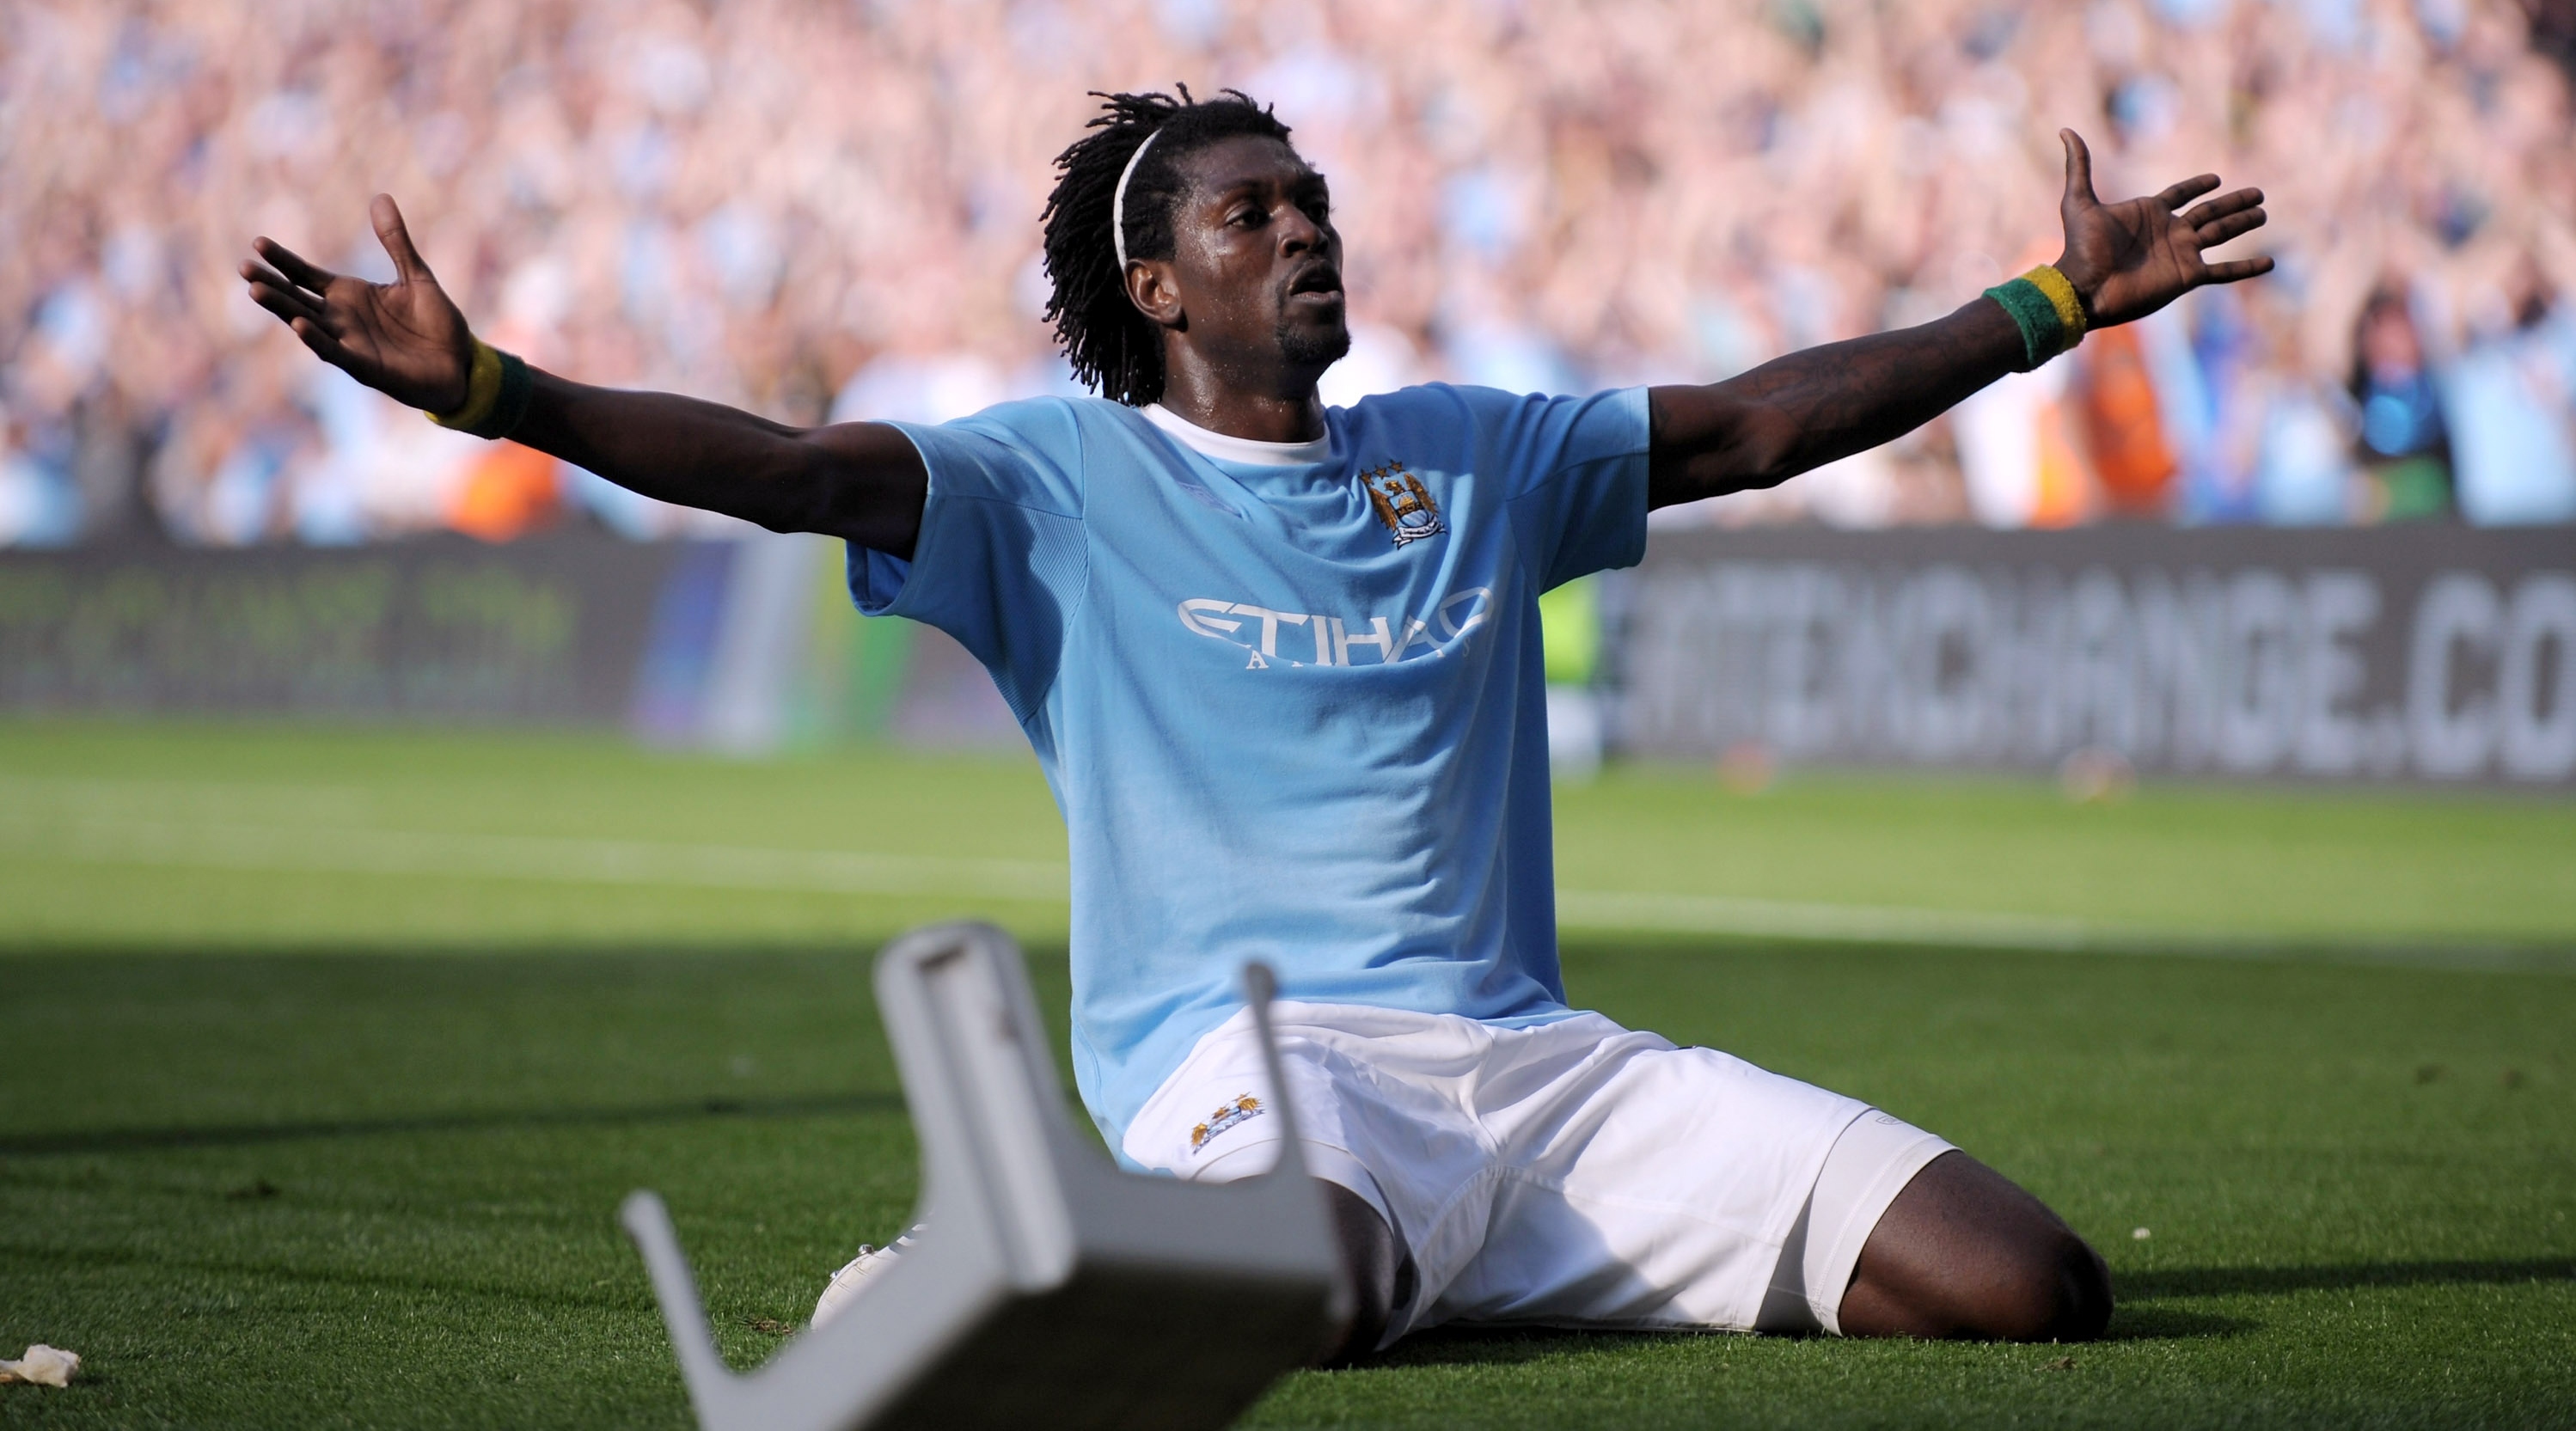 MANCHESTER, ENGLAND - SEPTEMBER 12: Emmanuel Adebayor of Manchester City celebrates in front of the Arsenal fans after scoring during the Barclays Premier League match between Manchester City and Arsenal at the City of Manchester Stadium on September 12, 2009 in Manchester, England. (Photo by Shaun Botterill/Getty Images)